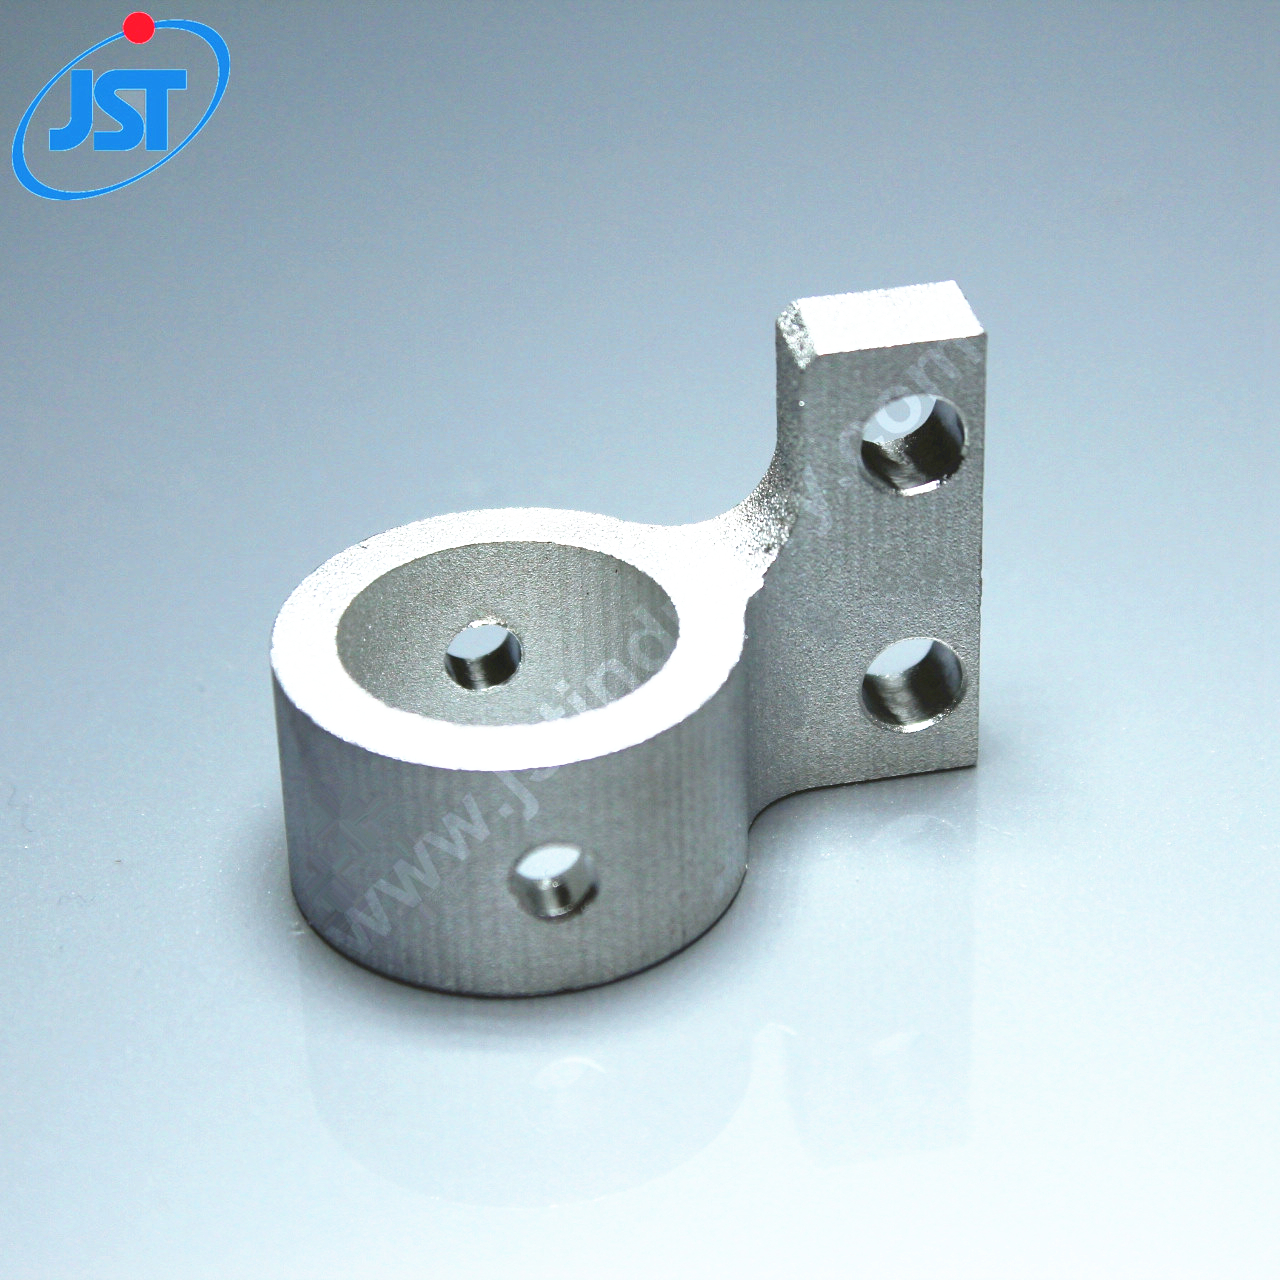 What are the characteristics of cnc milling aluminum parts?